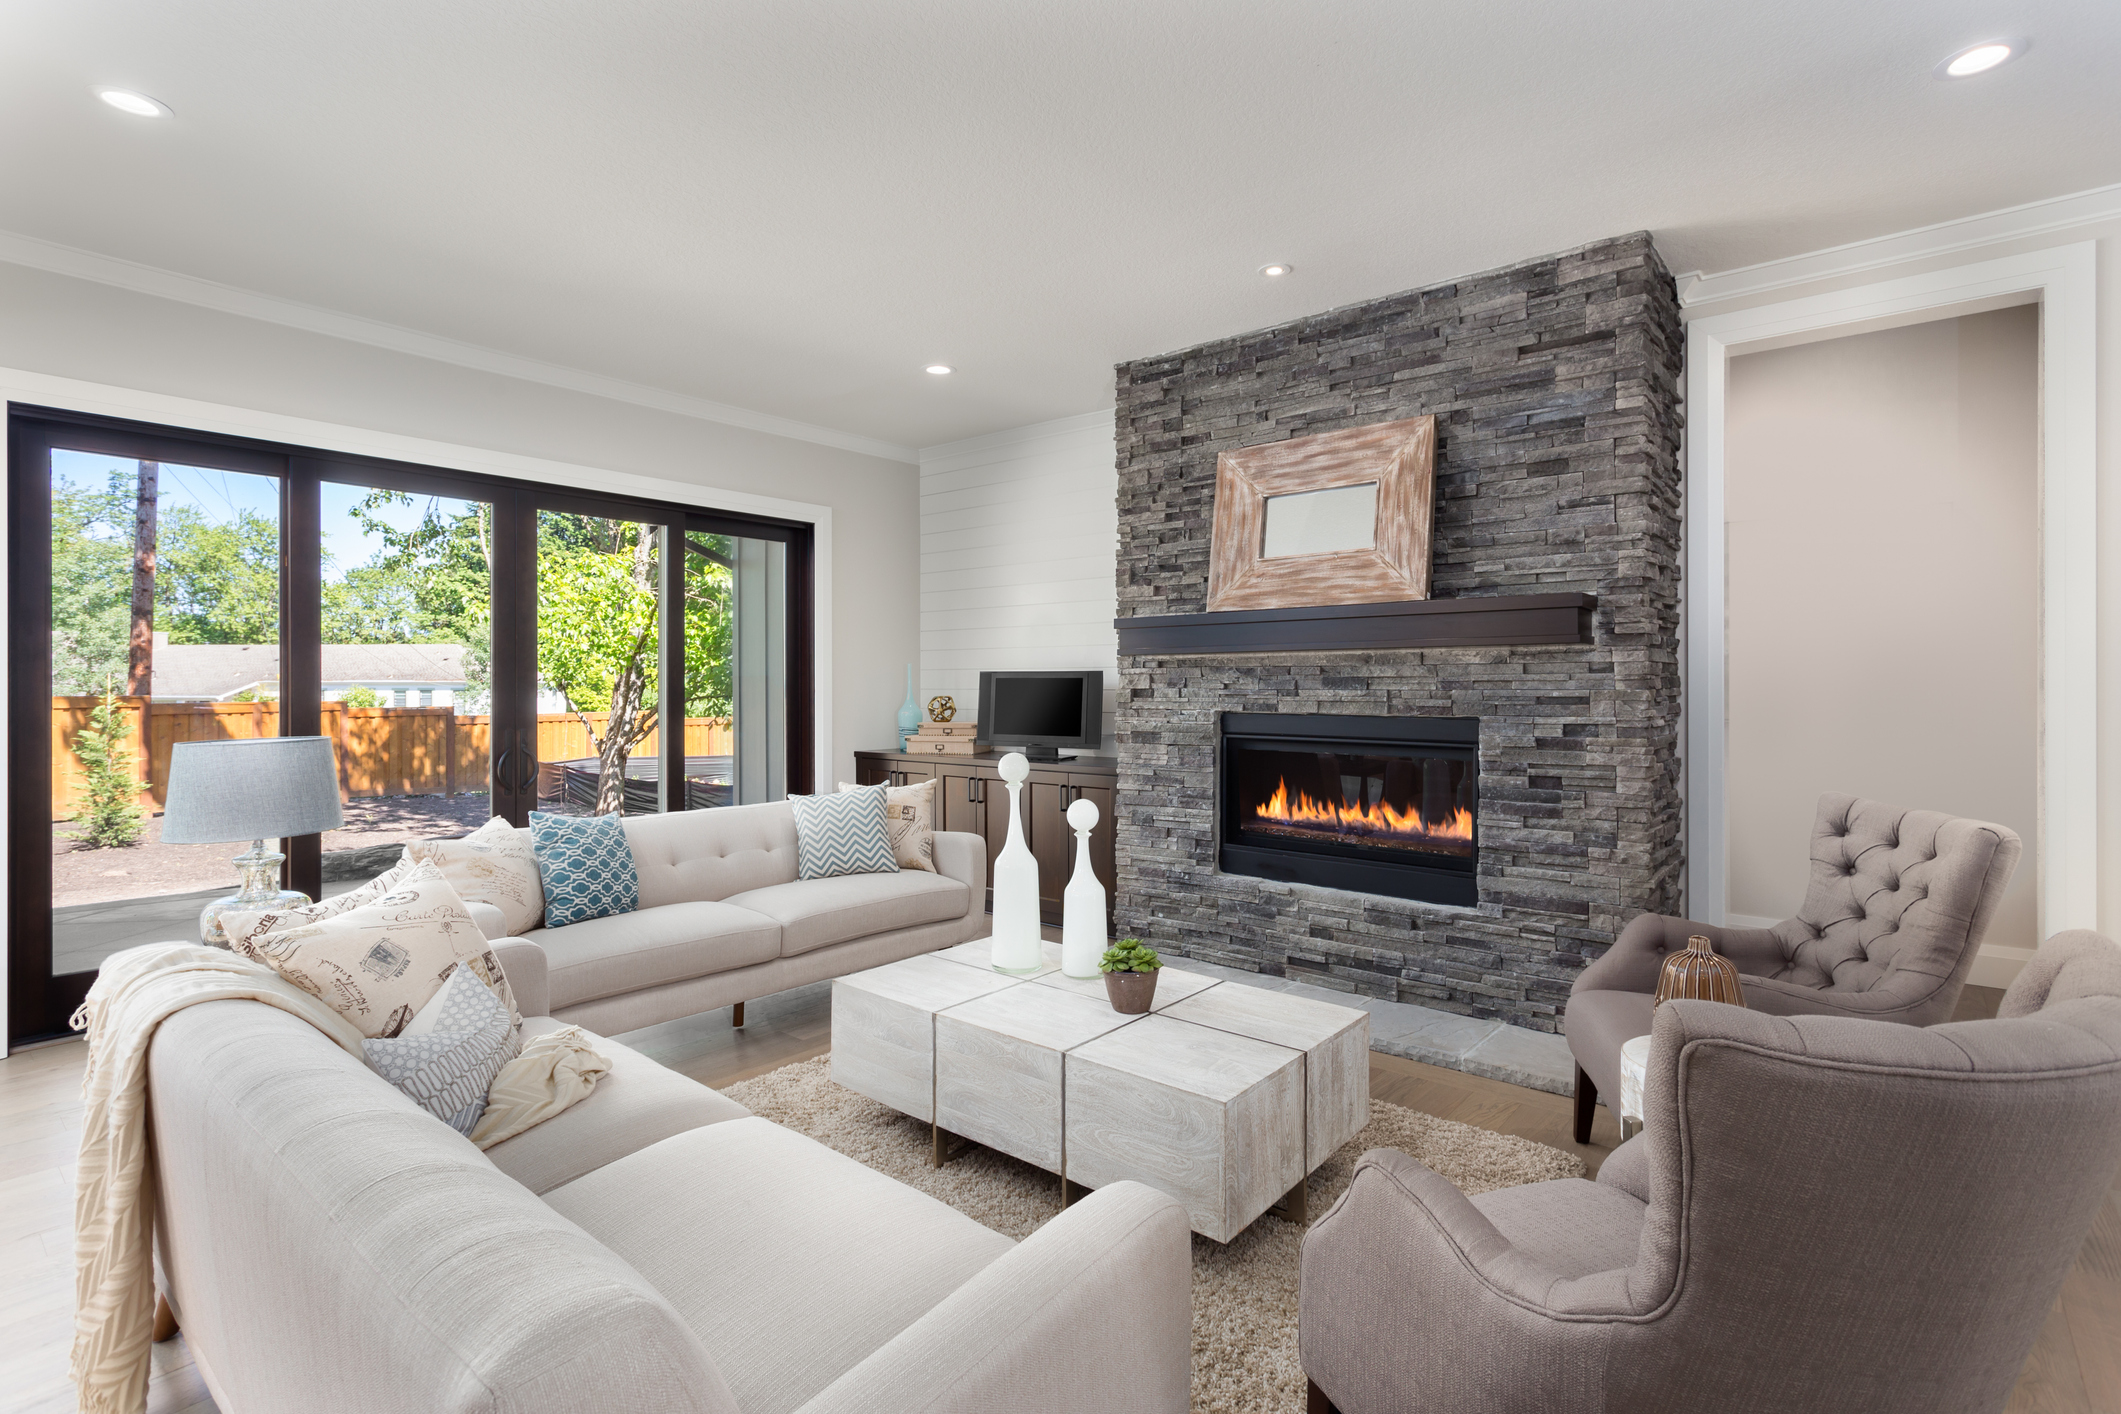 Does A Fireplace Add To Your Home S, How Much Does A Gas Fireplace Increase Home Value